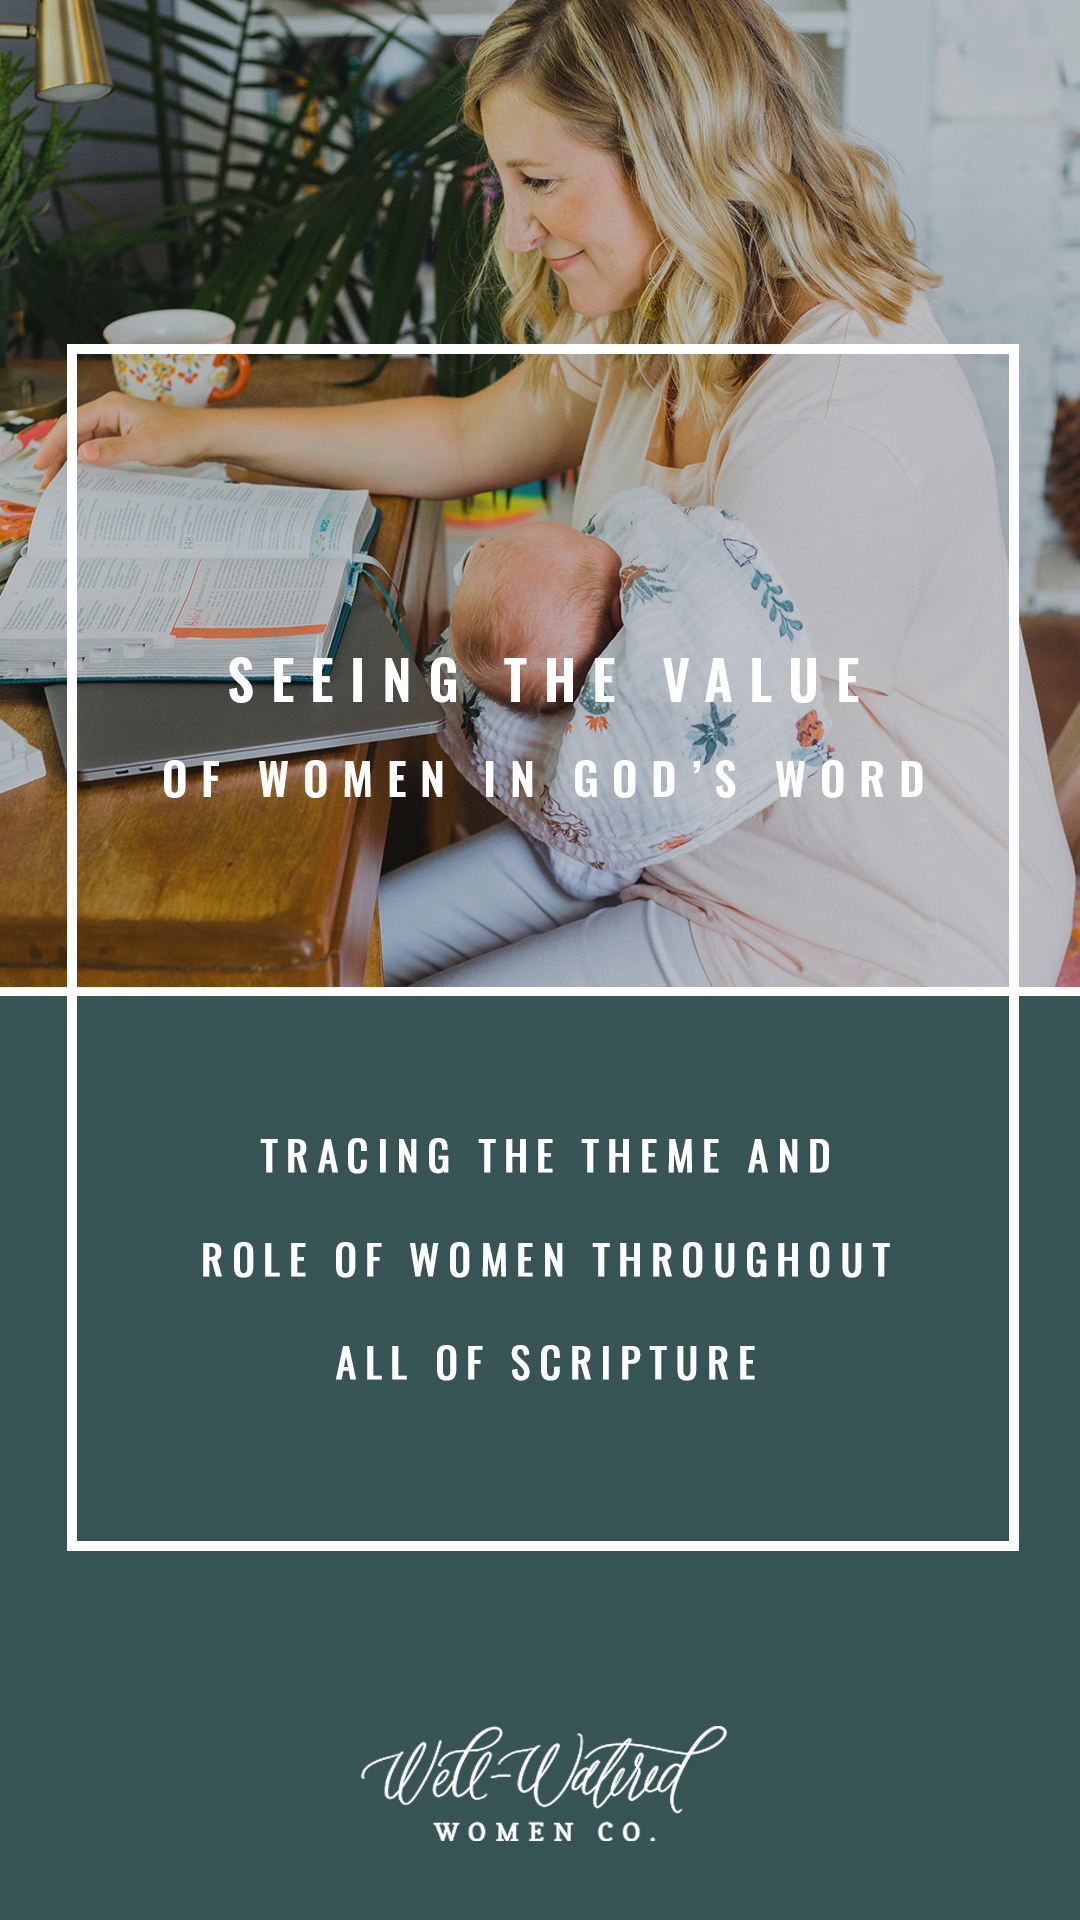 Well Watered Women Blog-Seeing the Value of Women Throughout God's Word